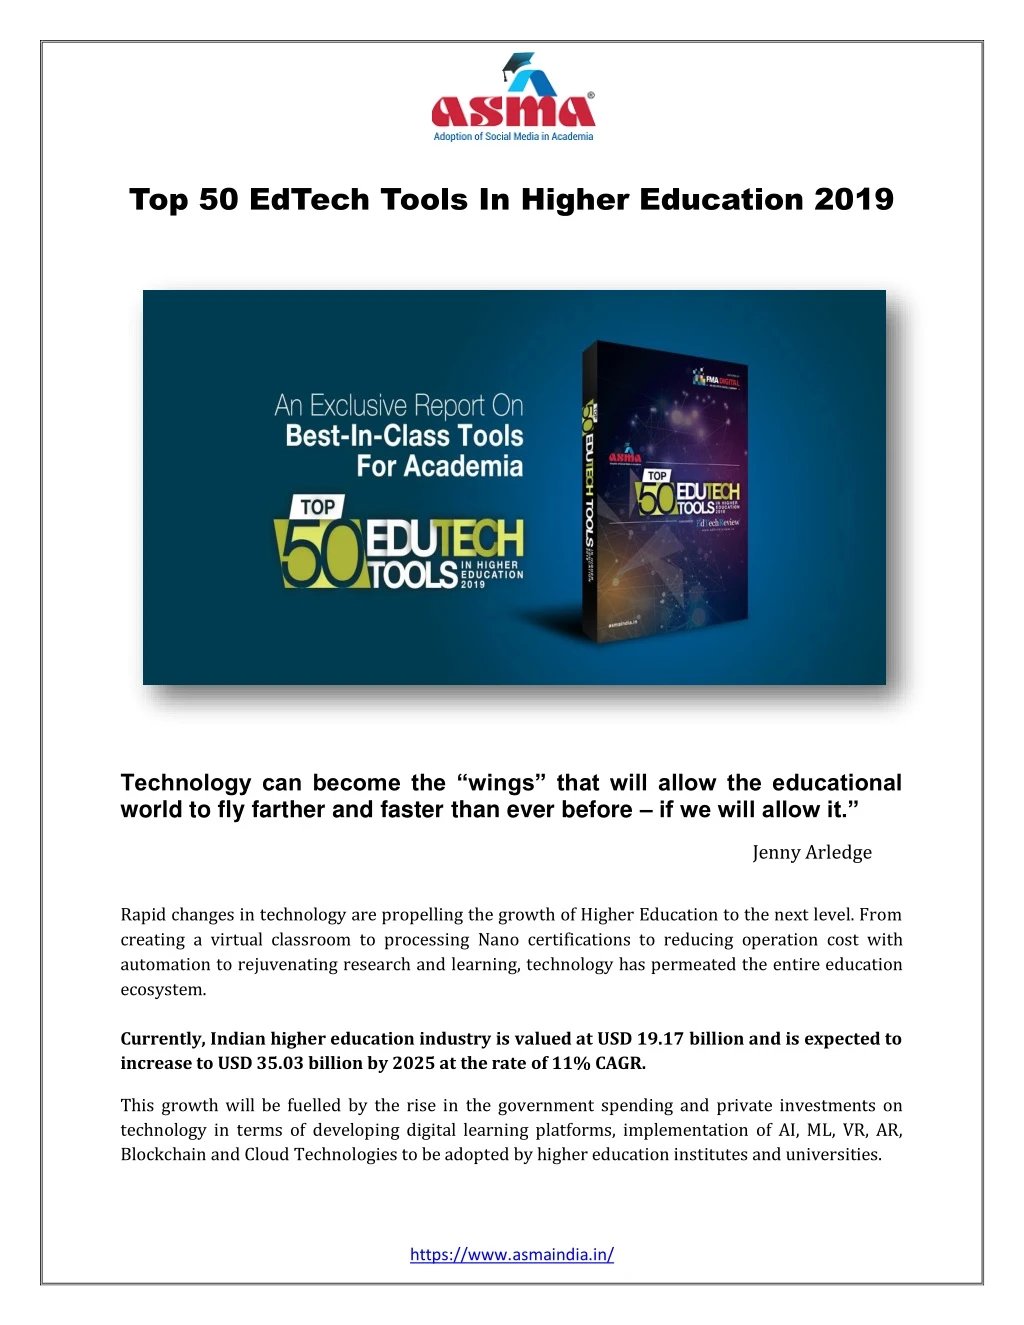 top 50 edtech tools in higher education 2019